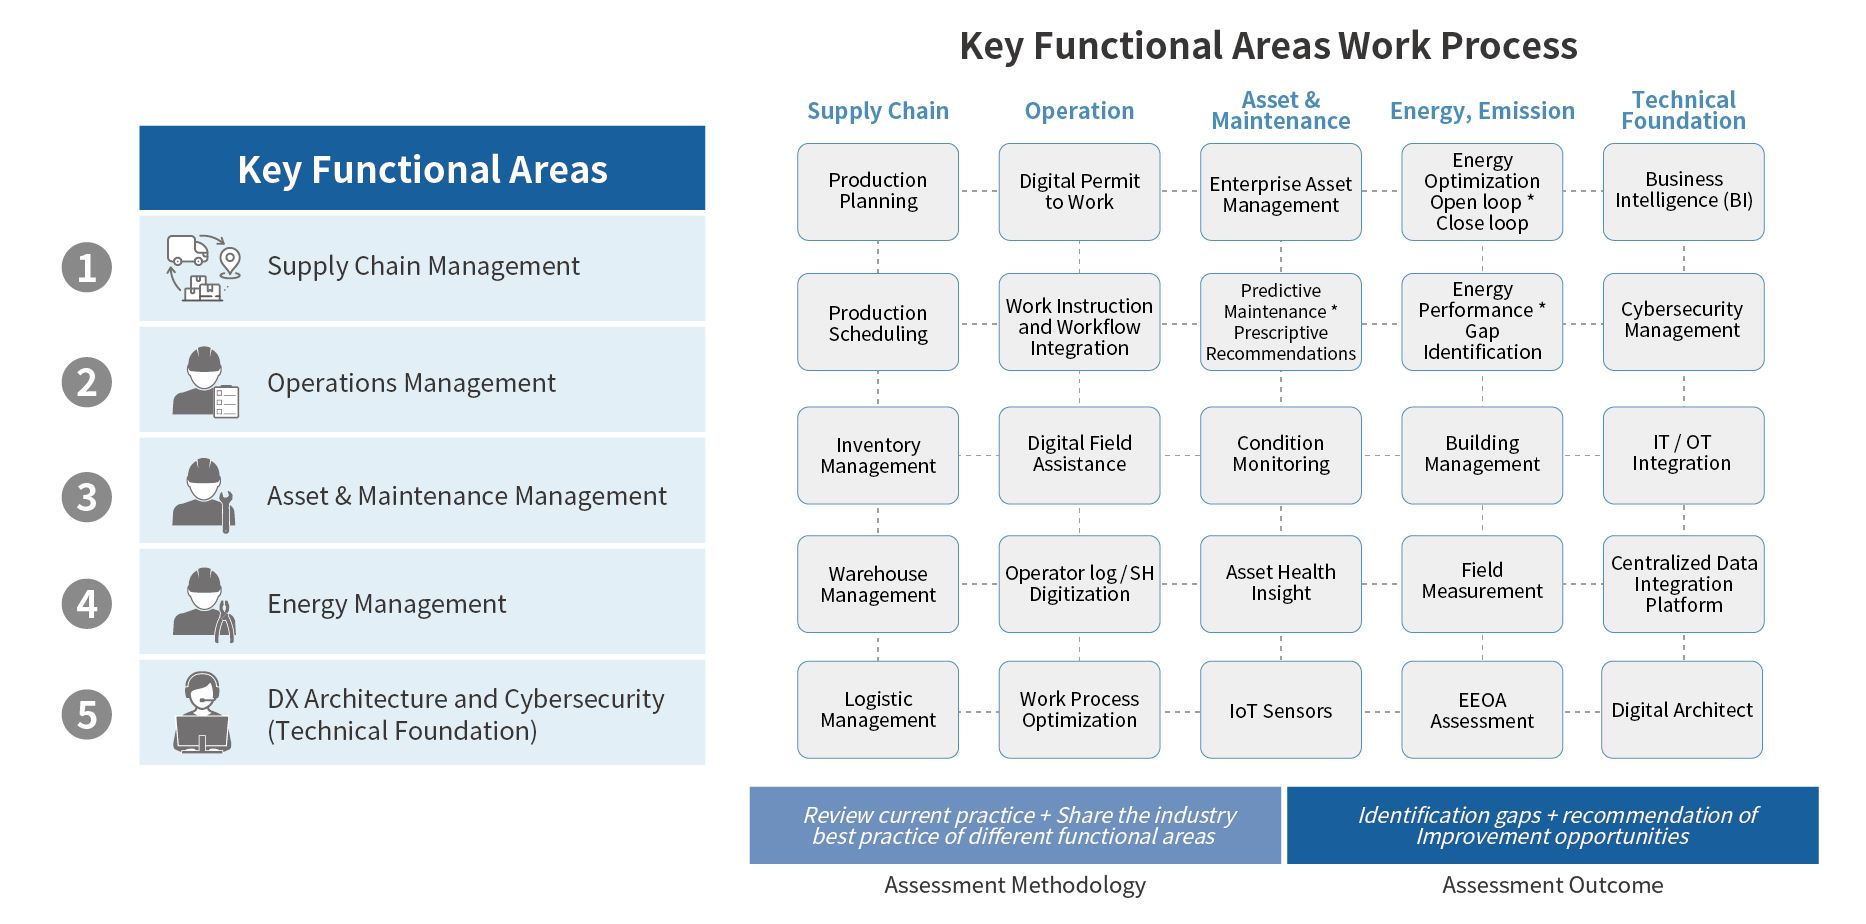 Key Functional Areas Work Process